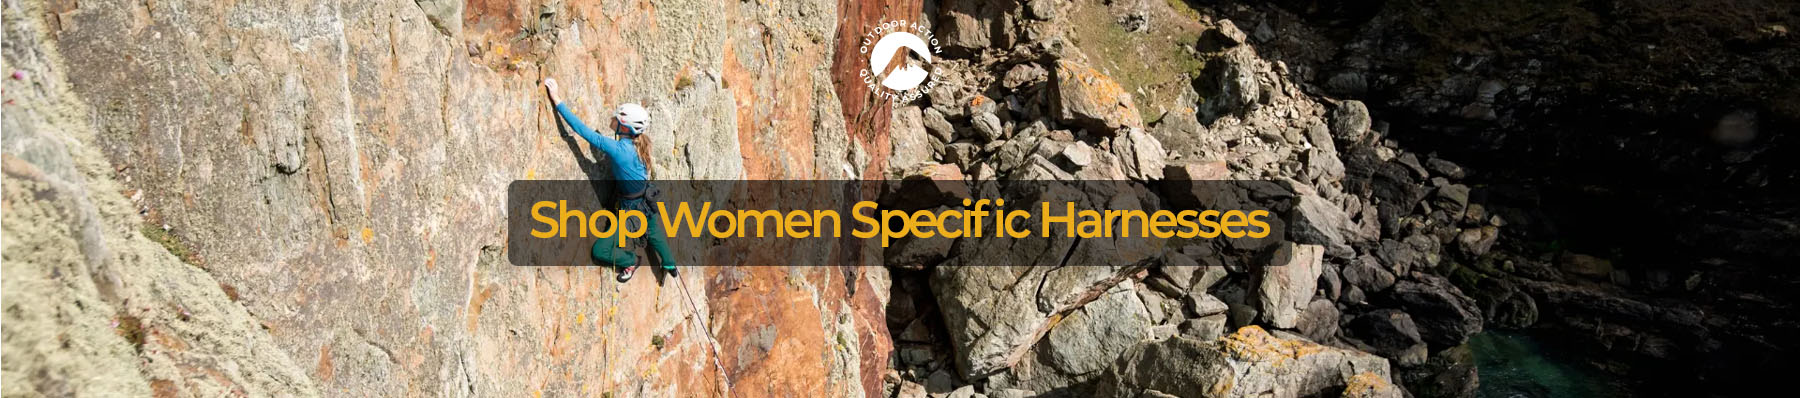 Shop Women Specific Harnesses online at Outdoor Action